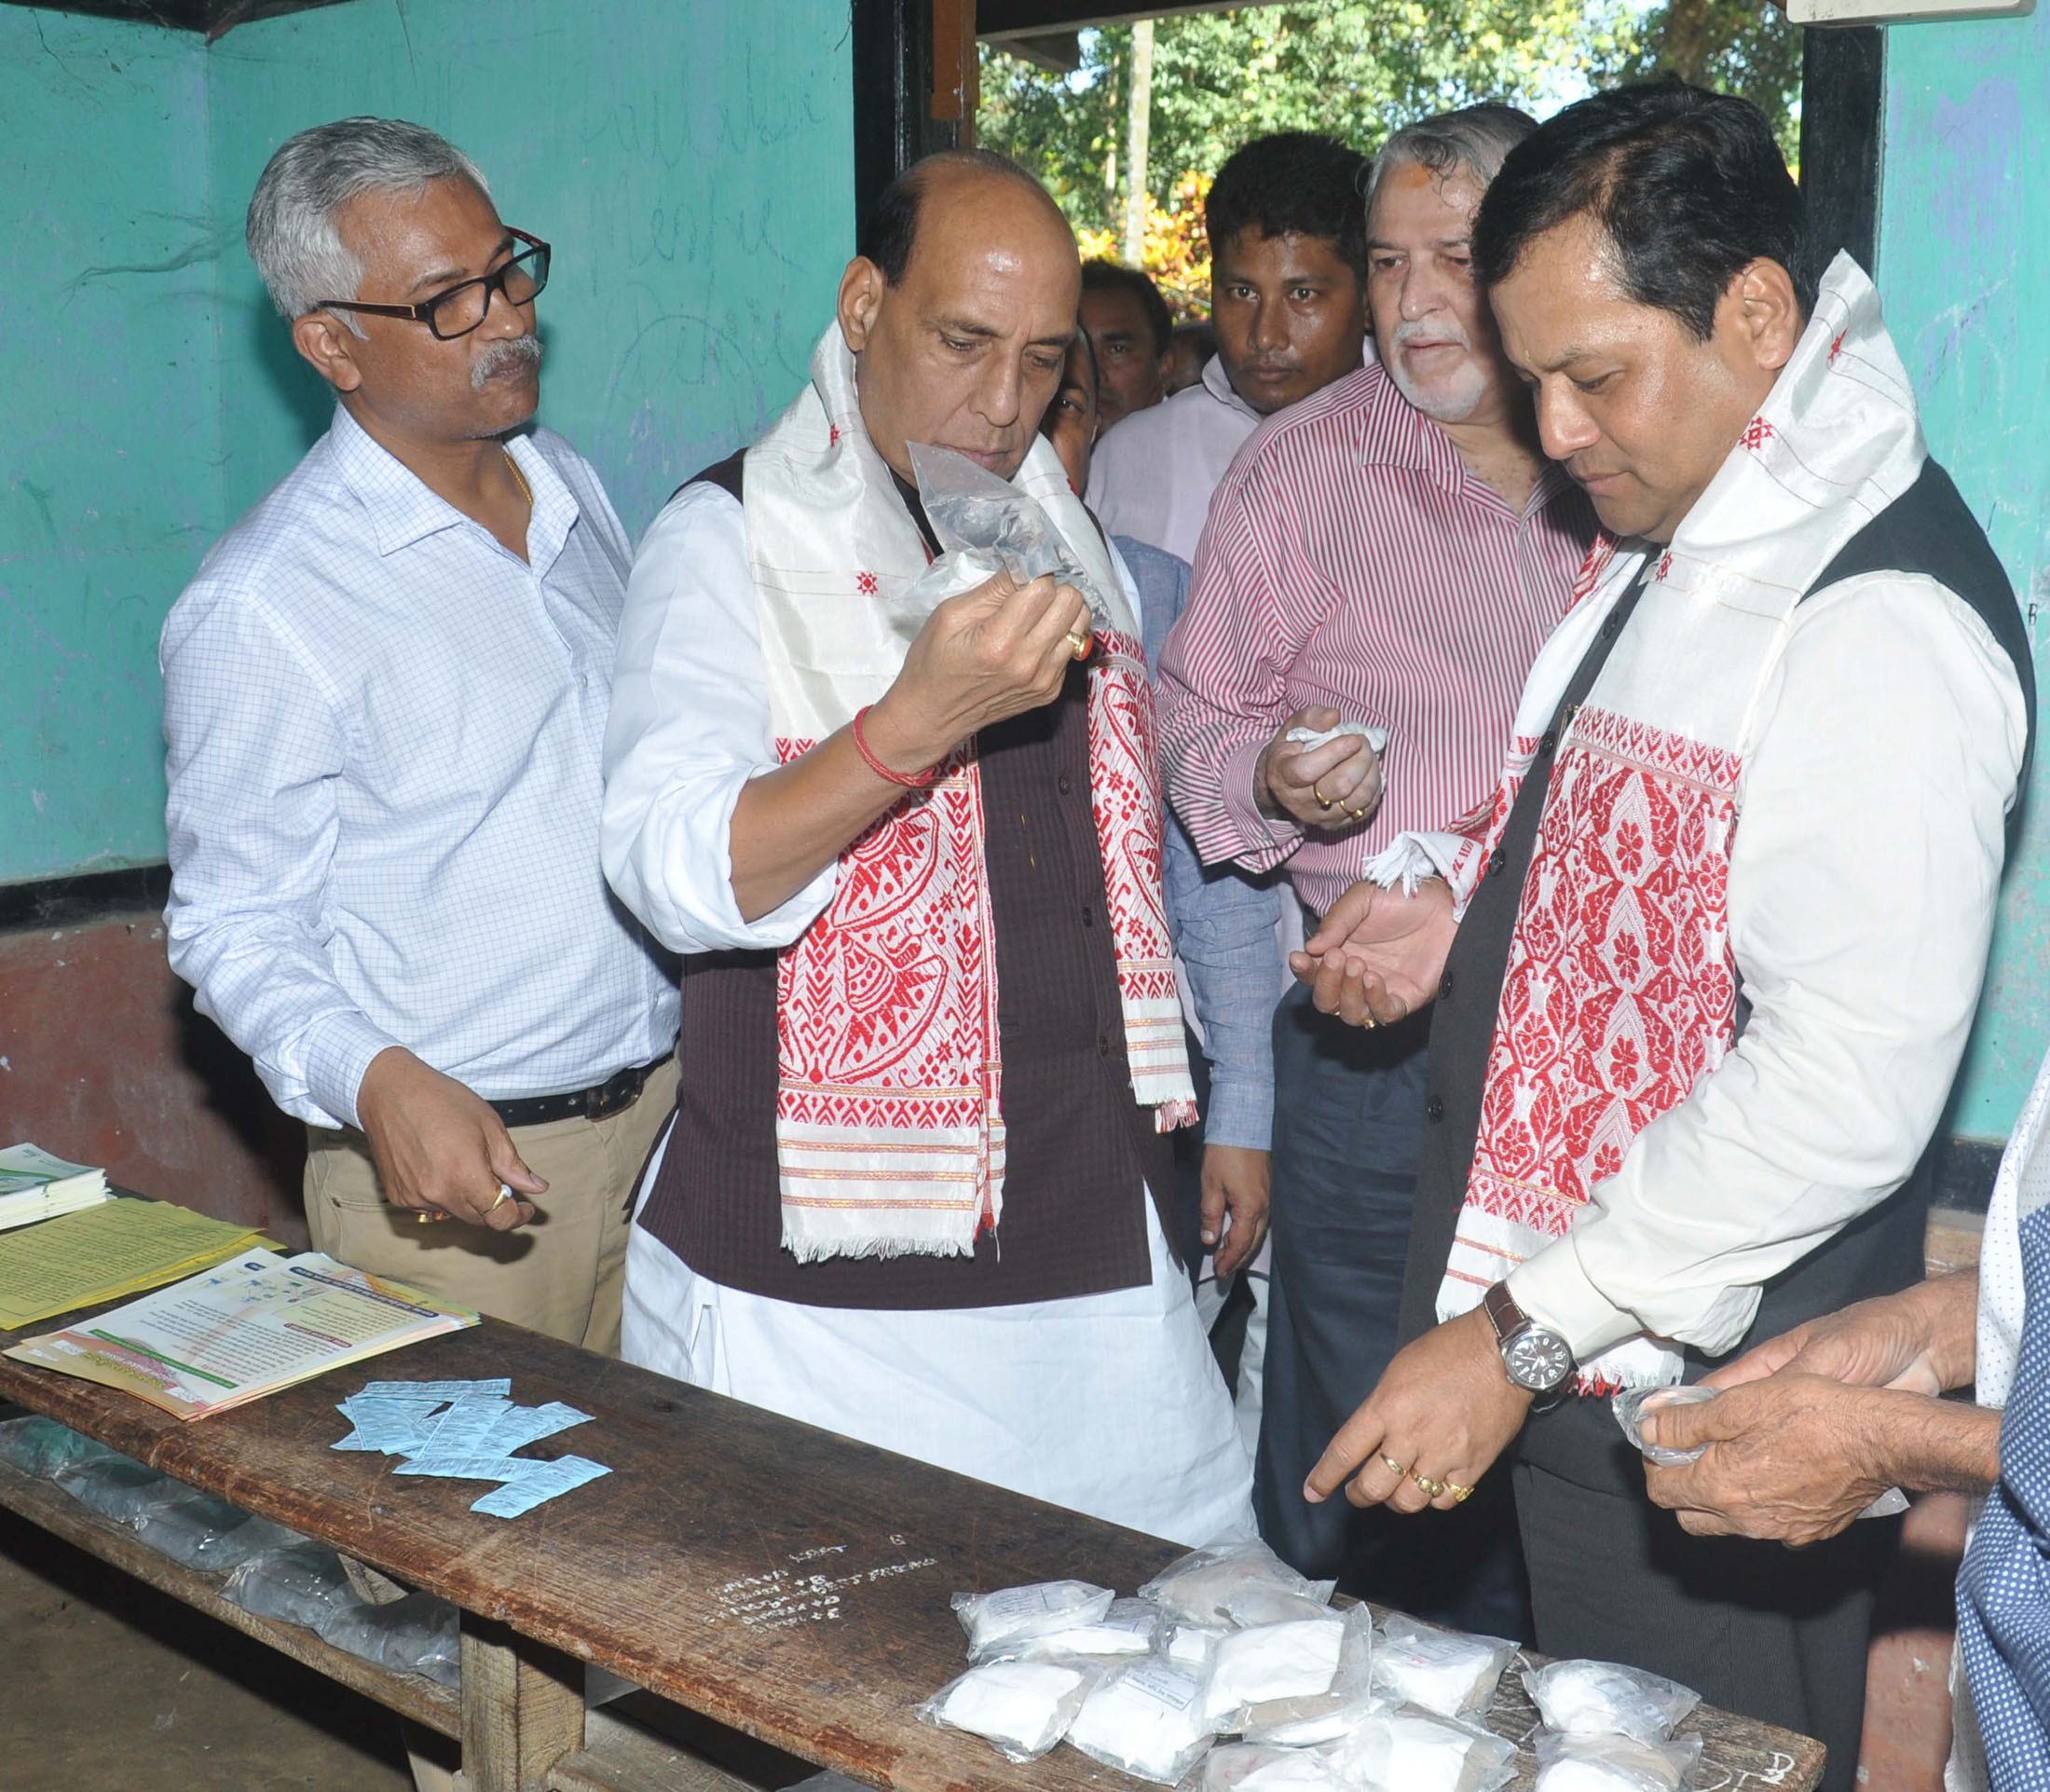 The Union Home Minister, Shri Rajnath Singh inspecting the relive material at flood relive camp, at Morigaon District of Assam on July 30, 2016. 	The Chief Minister of Assam, Shri Sarbananda Sonowal is also seen.